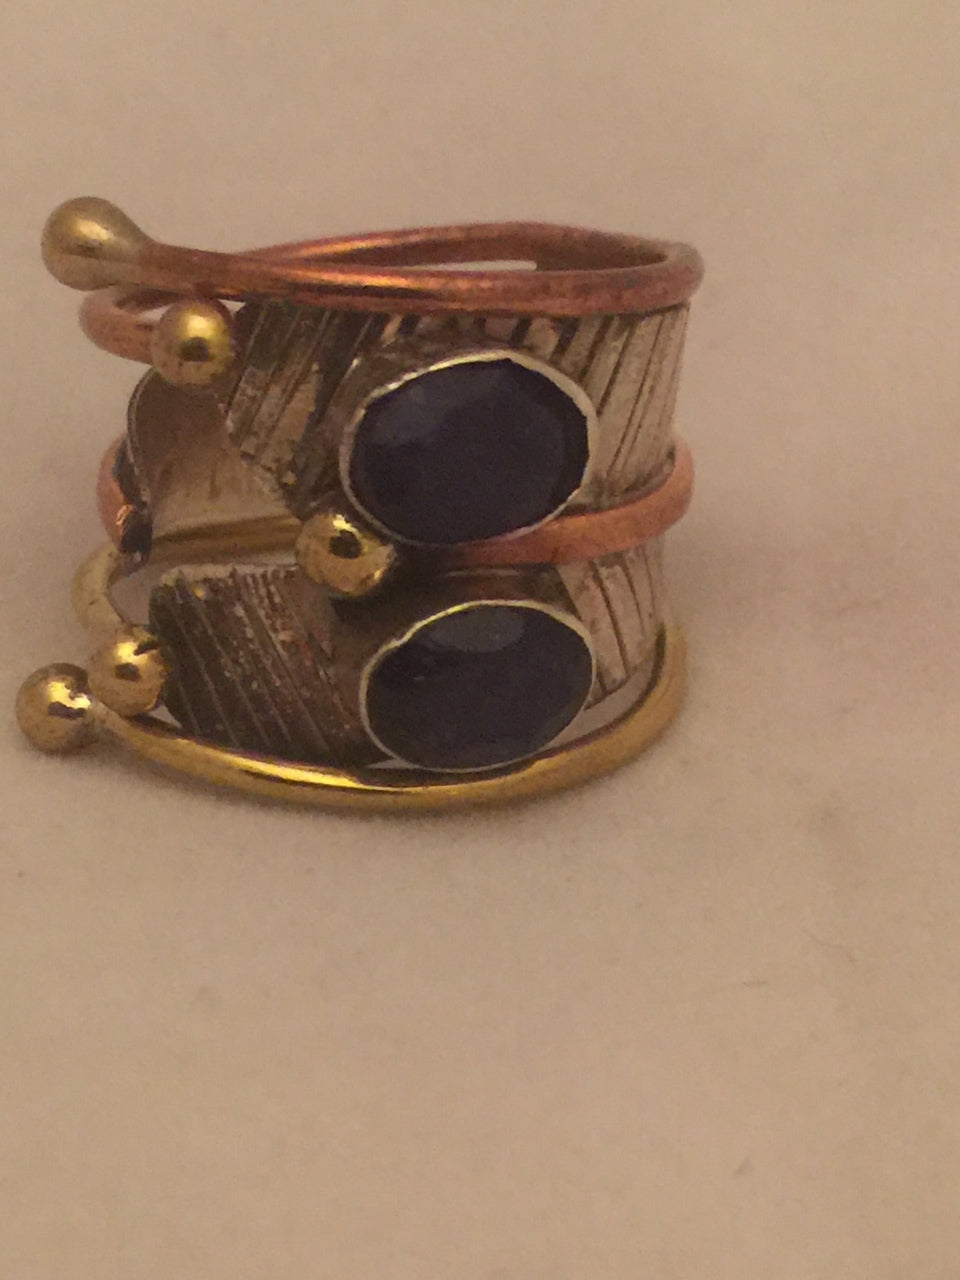 Vintage Sterling Silver ring w Detailing in Copper & Brass Overlay Deep Blue Sapphire Colored Stones   Size 6.5 Weight  5.9g